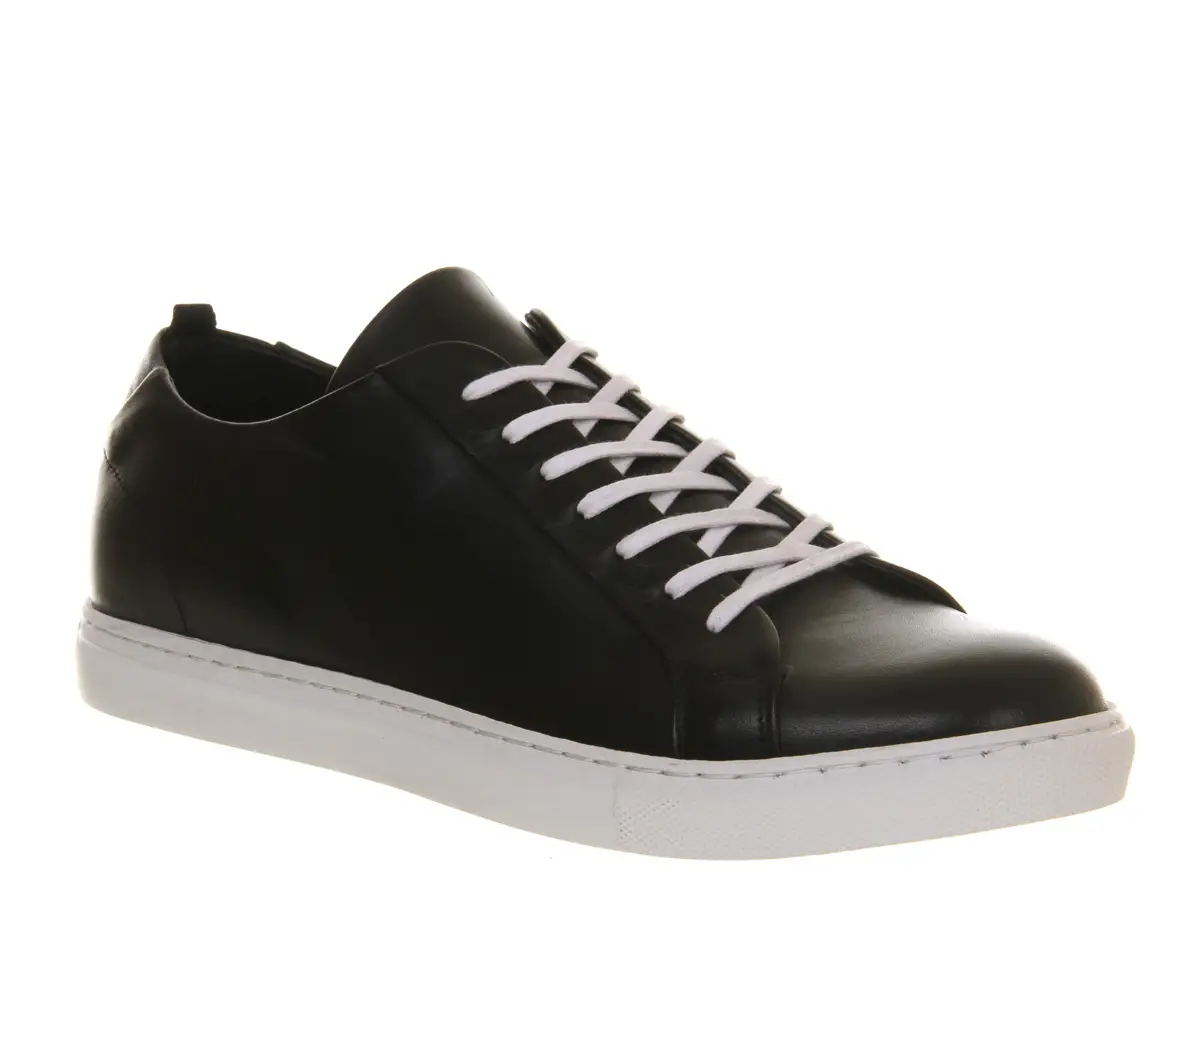 Mens Poste Matteo Sneaker BLACK LEATHER WHITE SOLE Casual Shoes